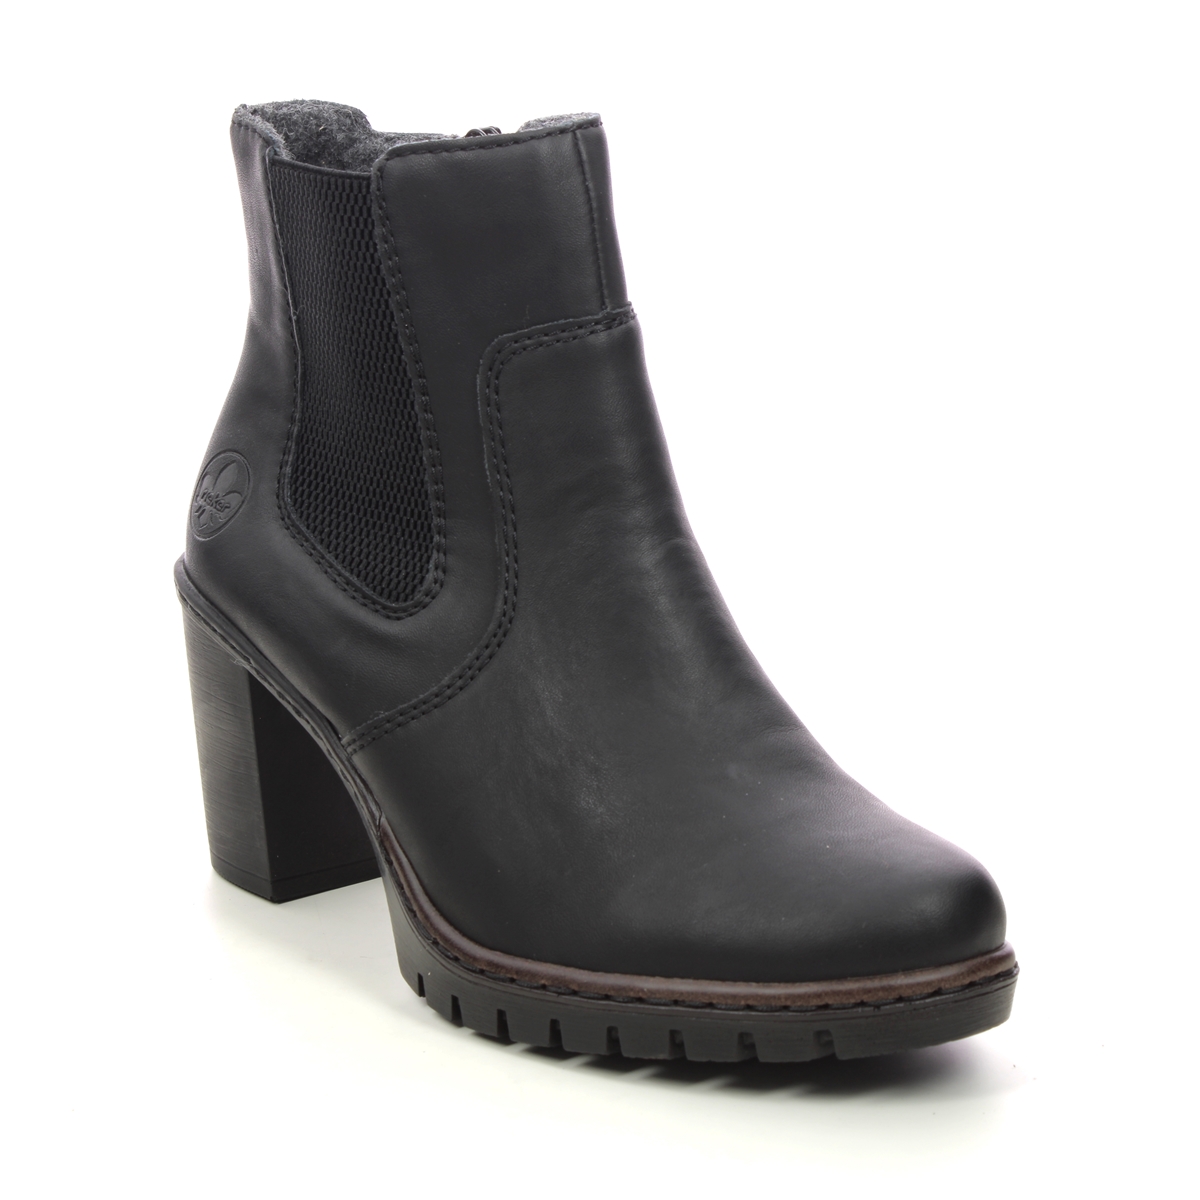 Rieker Y2574-00 Black Womens ankle boots in a Plain Man-made in Size 39